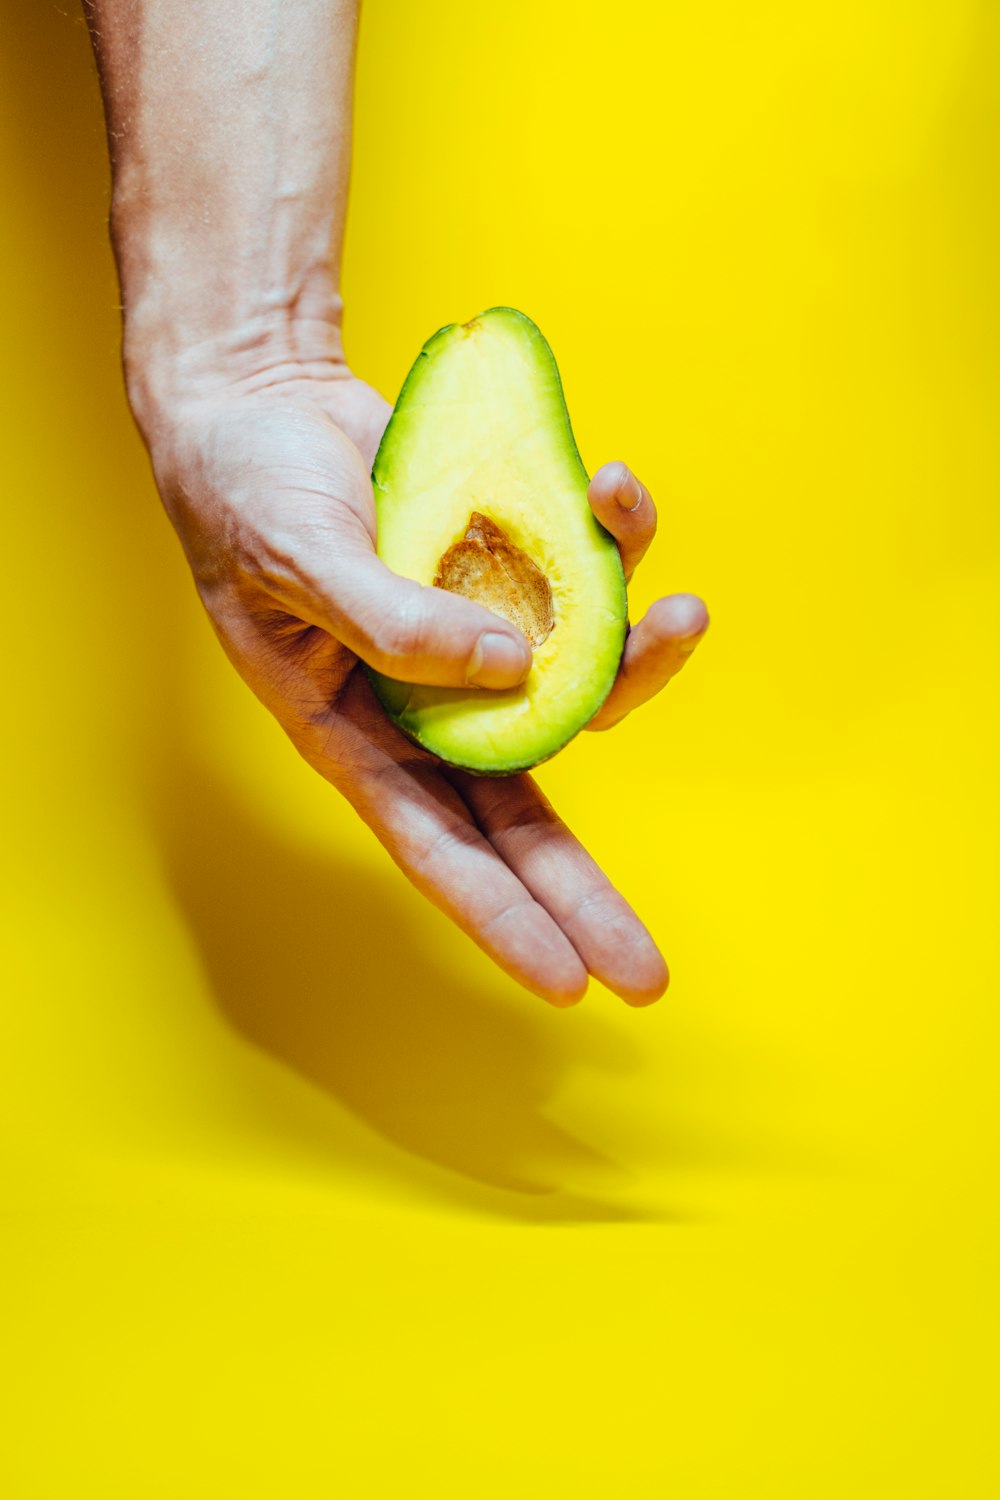 person holding green fruit on yellow surface